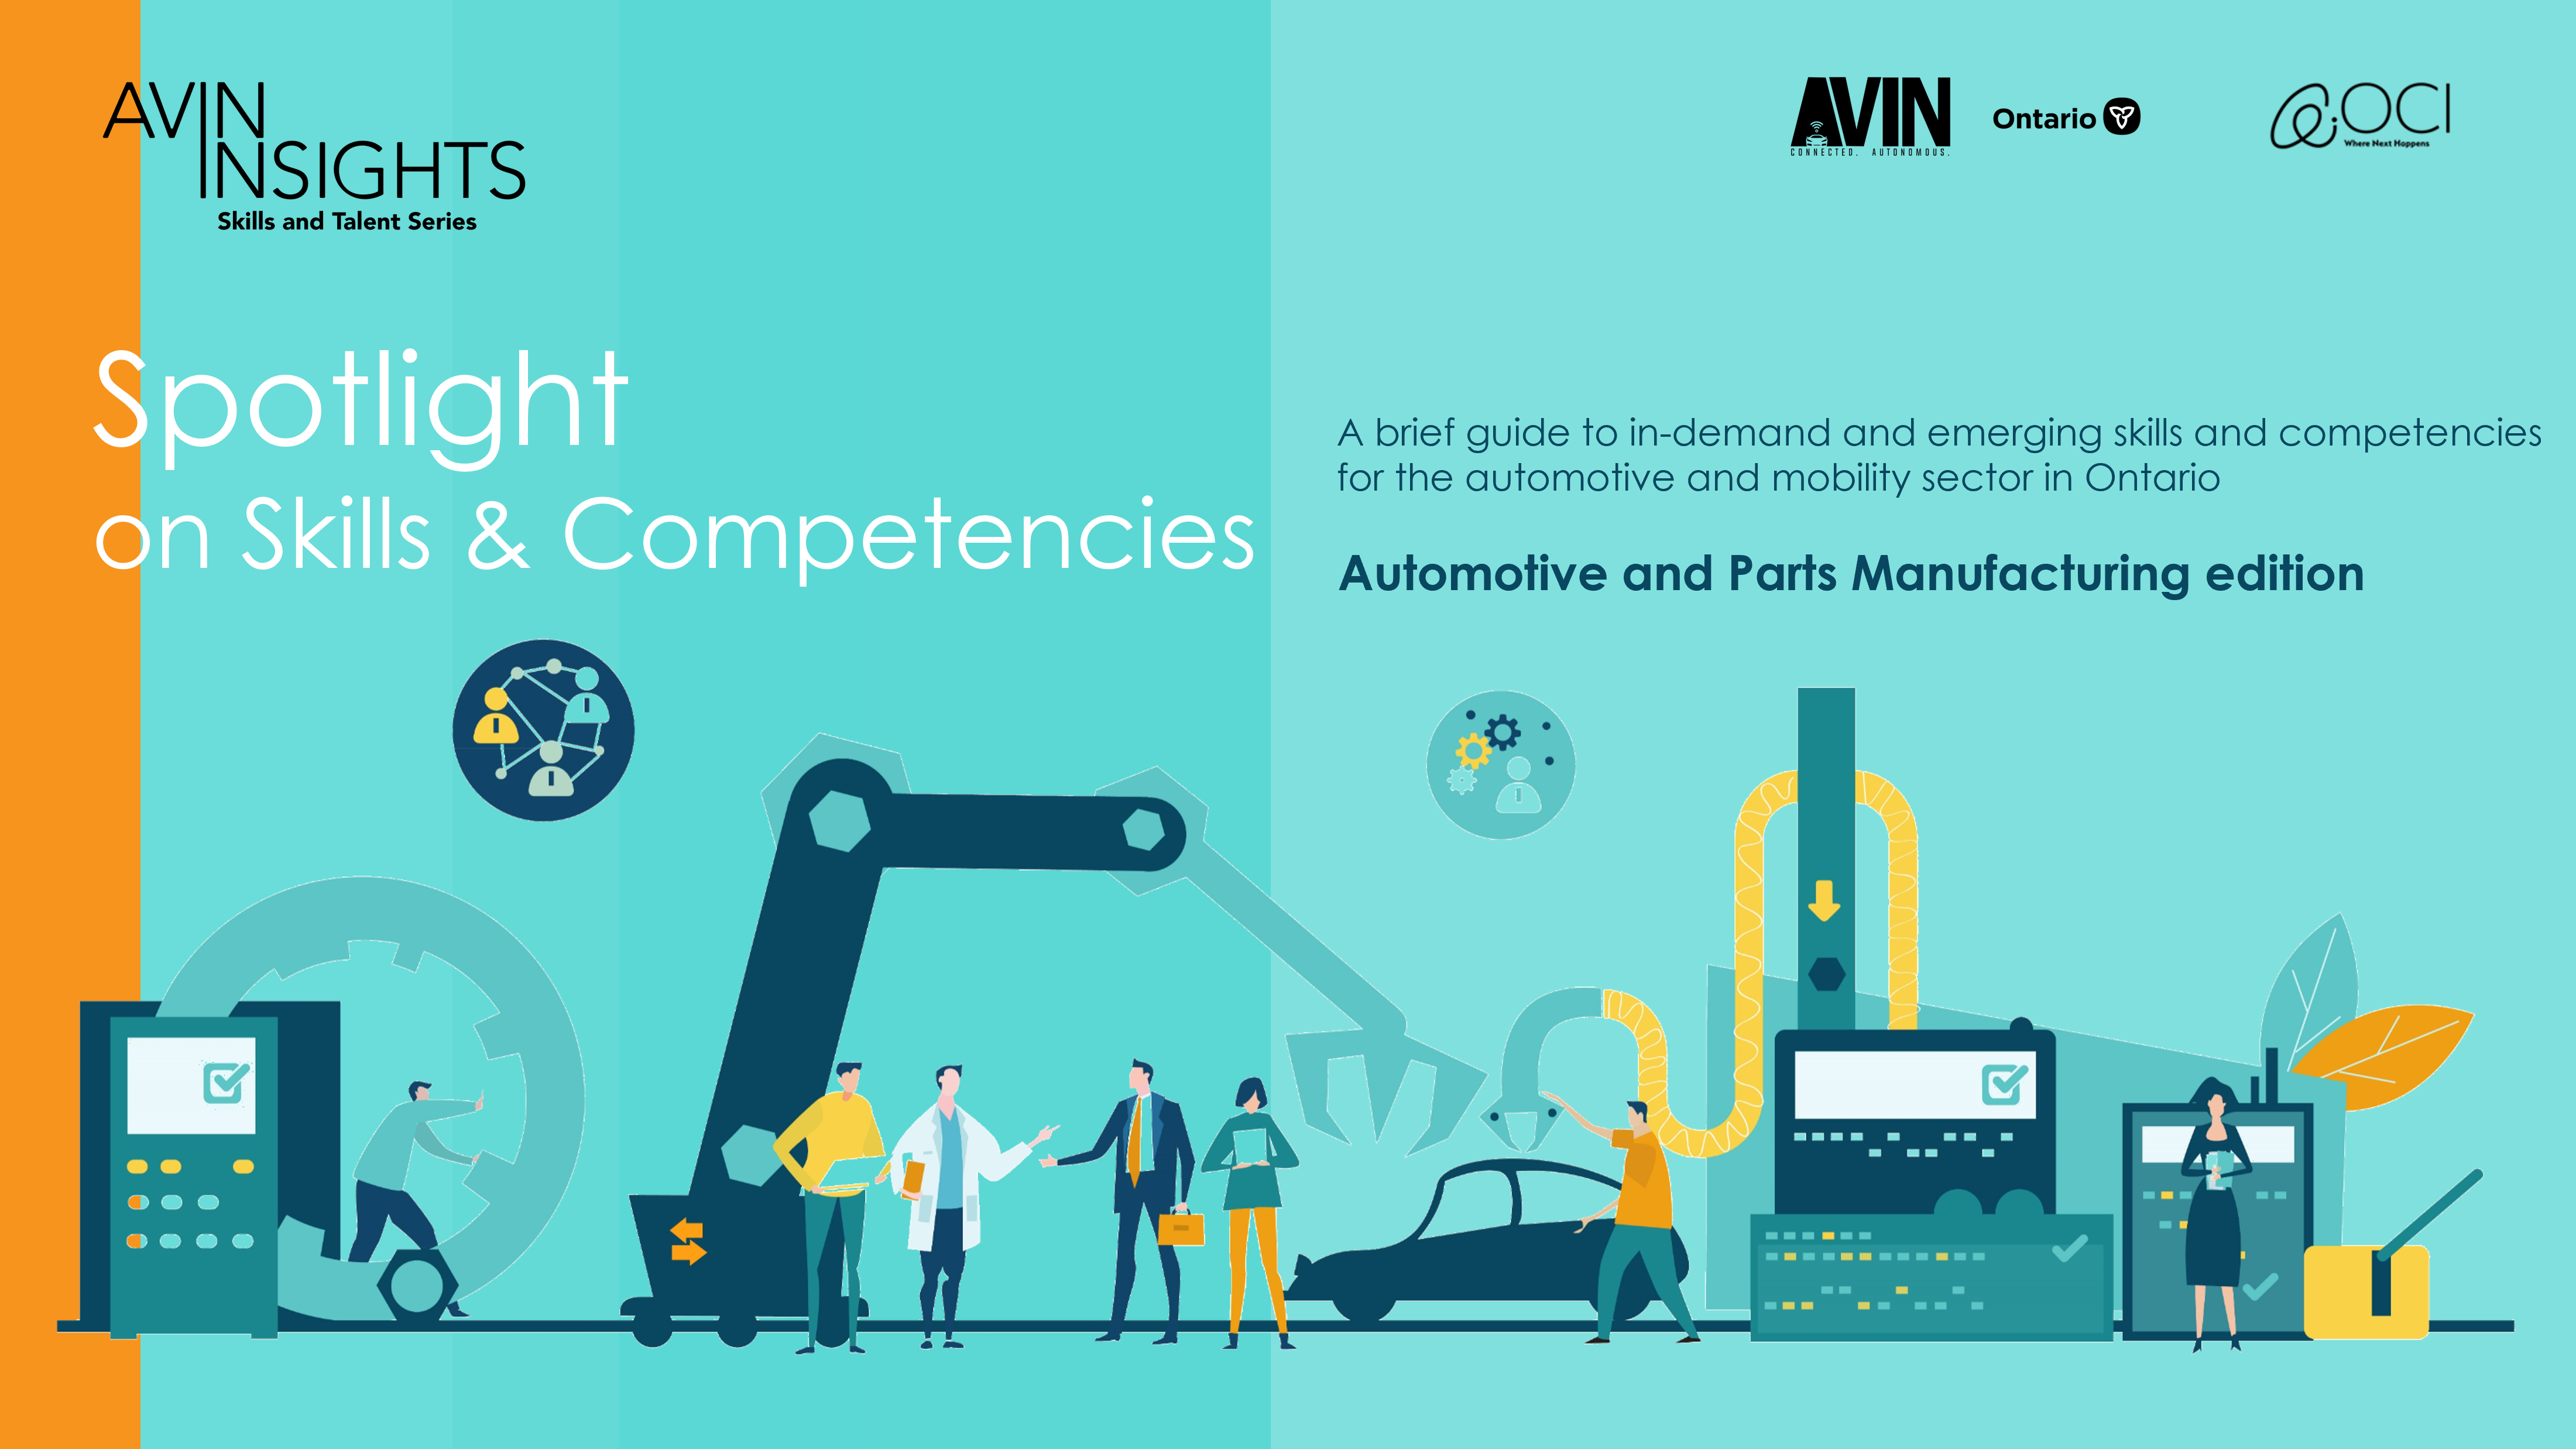 Spotlights on Skills and Competencies – Automotive and Parts Manufacturing edition